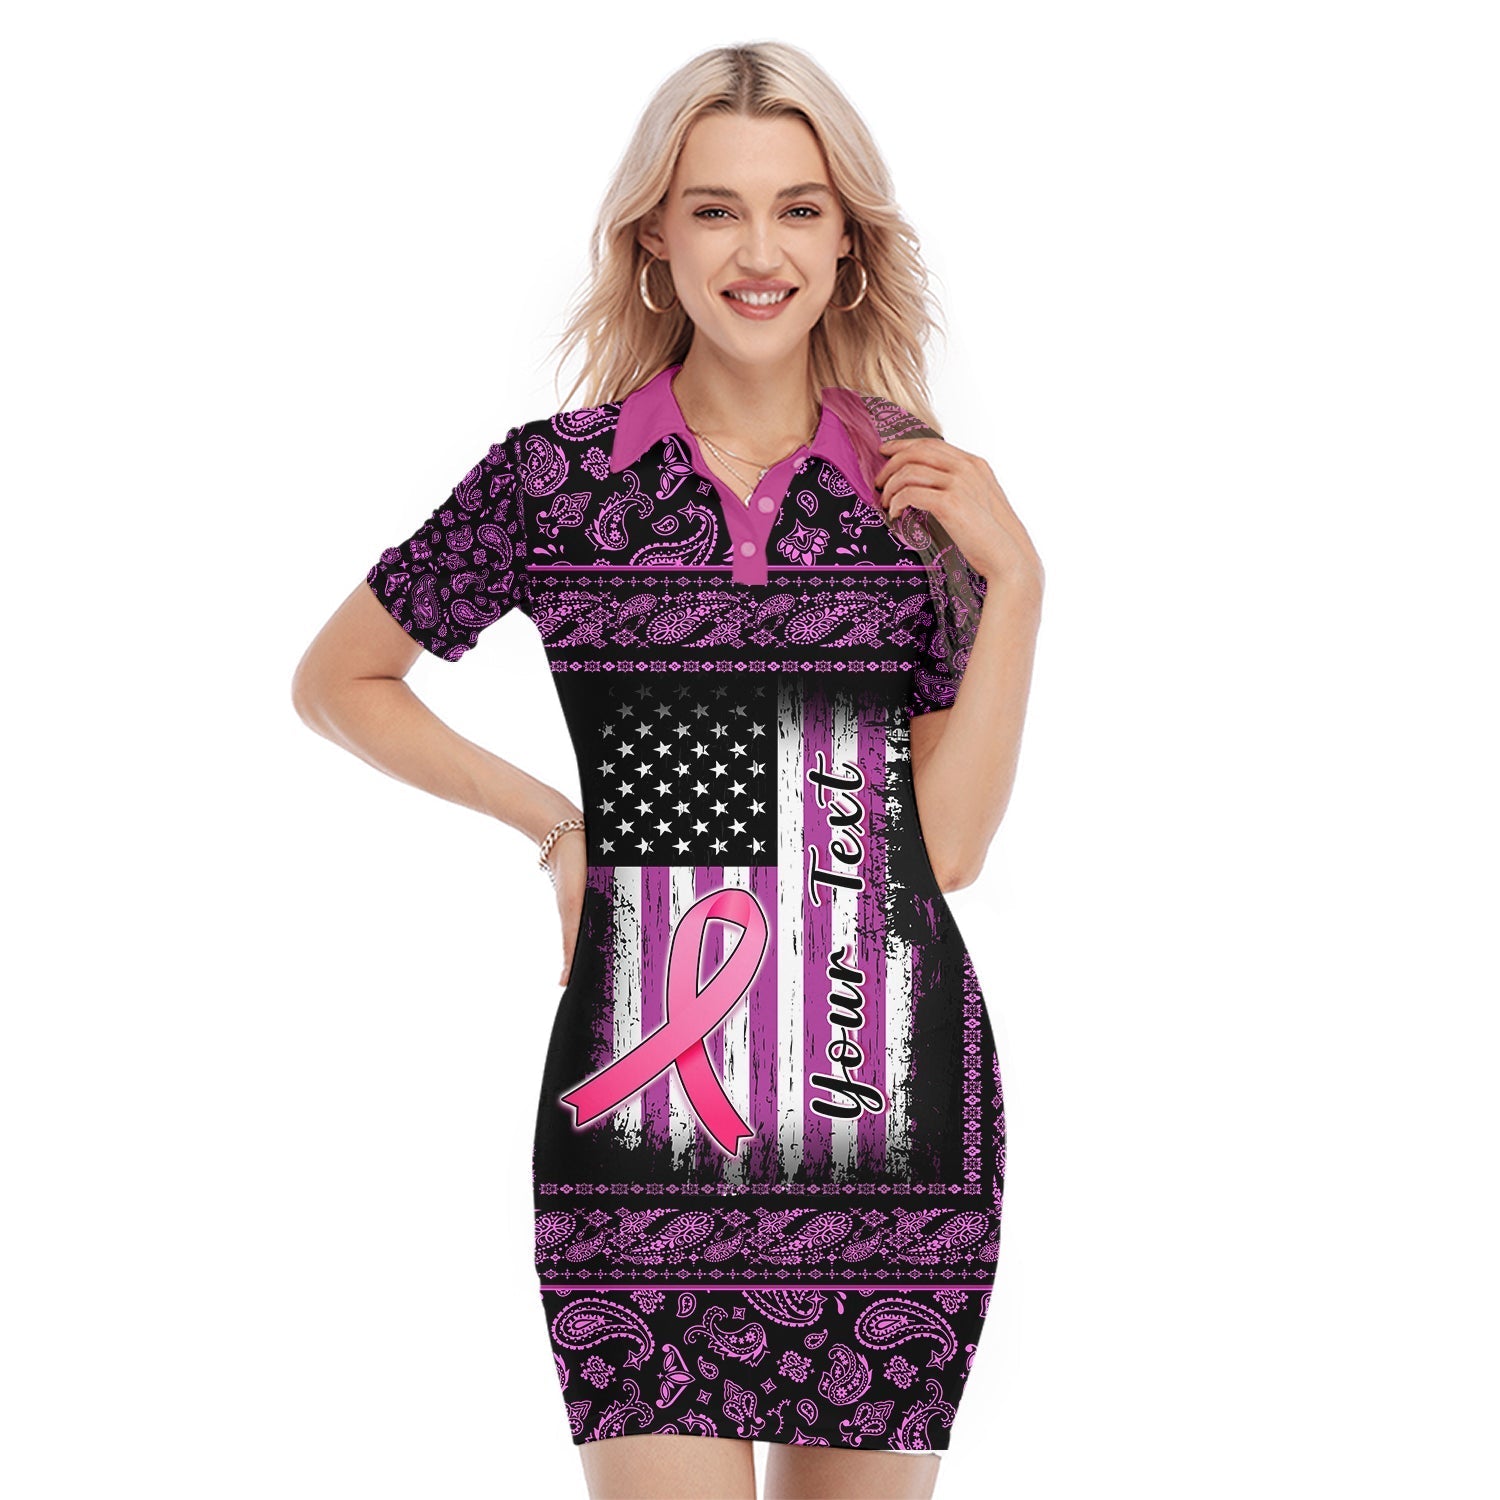 custom-personalised-breast-cancer-polo-dress-black-paisley-pattern-in-october-we-wear-pink